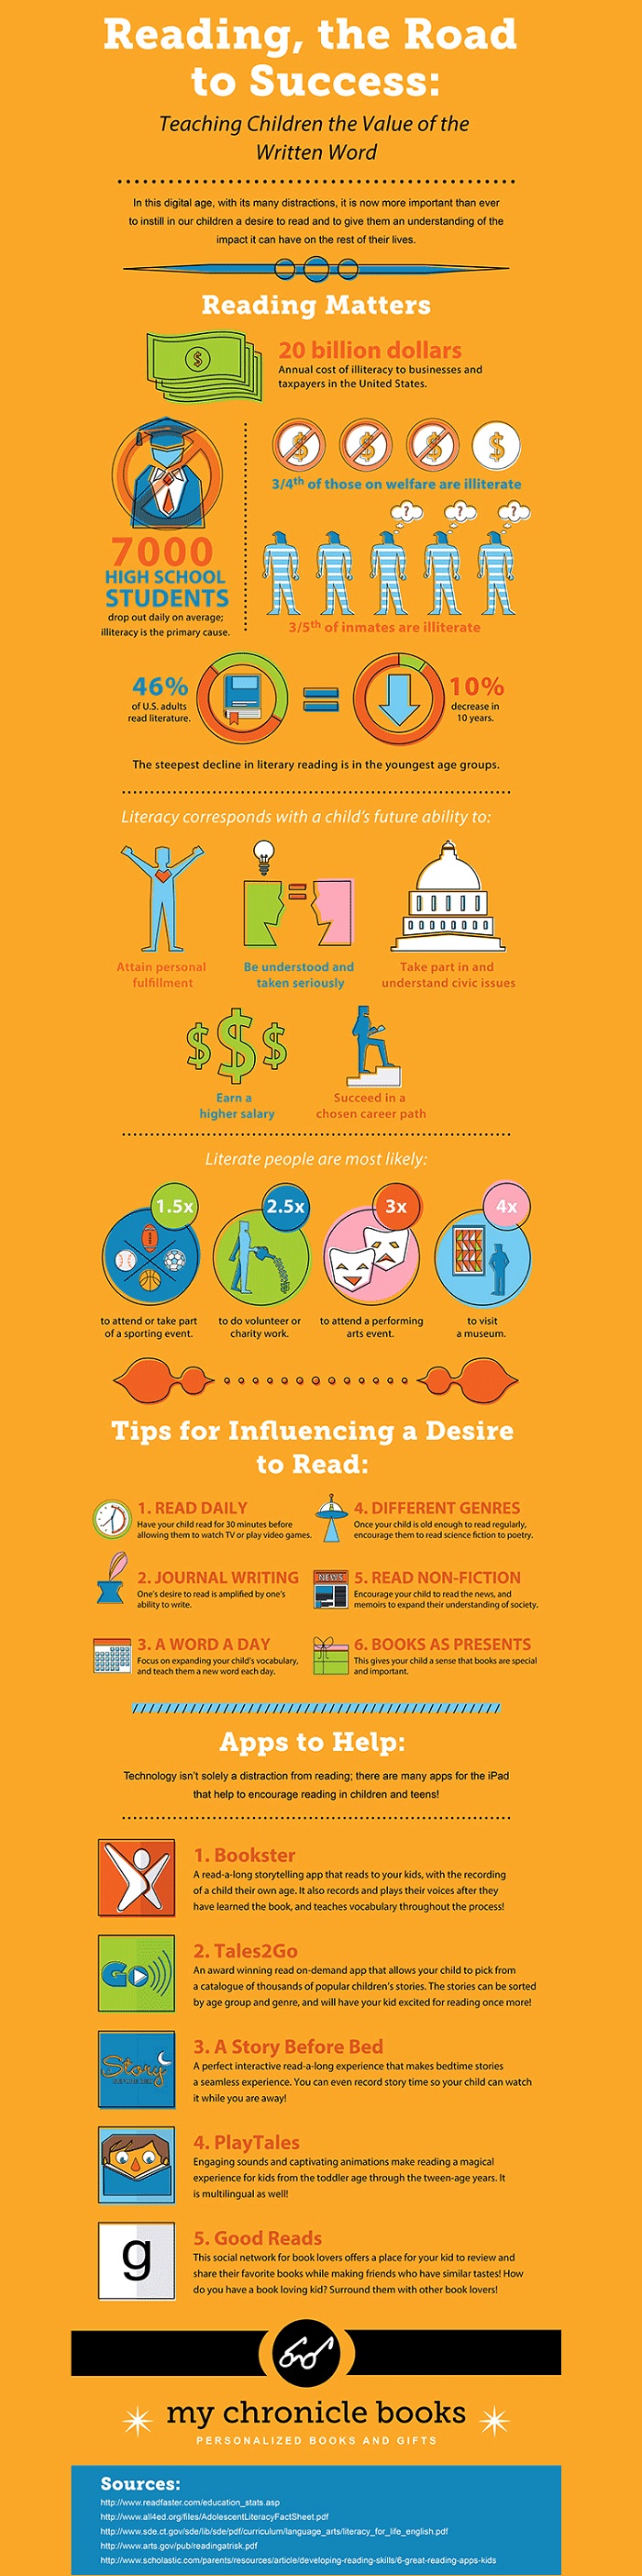 the-value-of-reading-infographic-galleycat